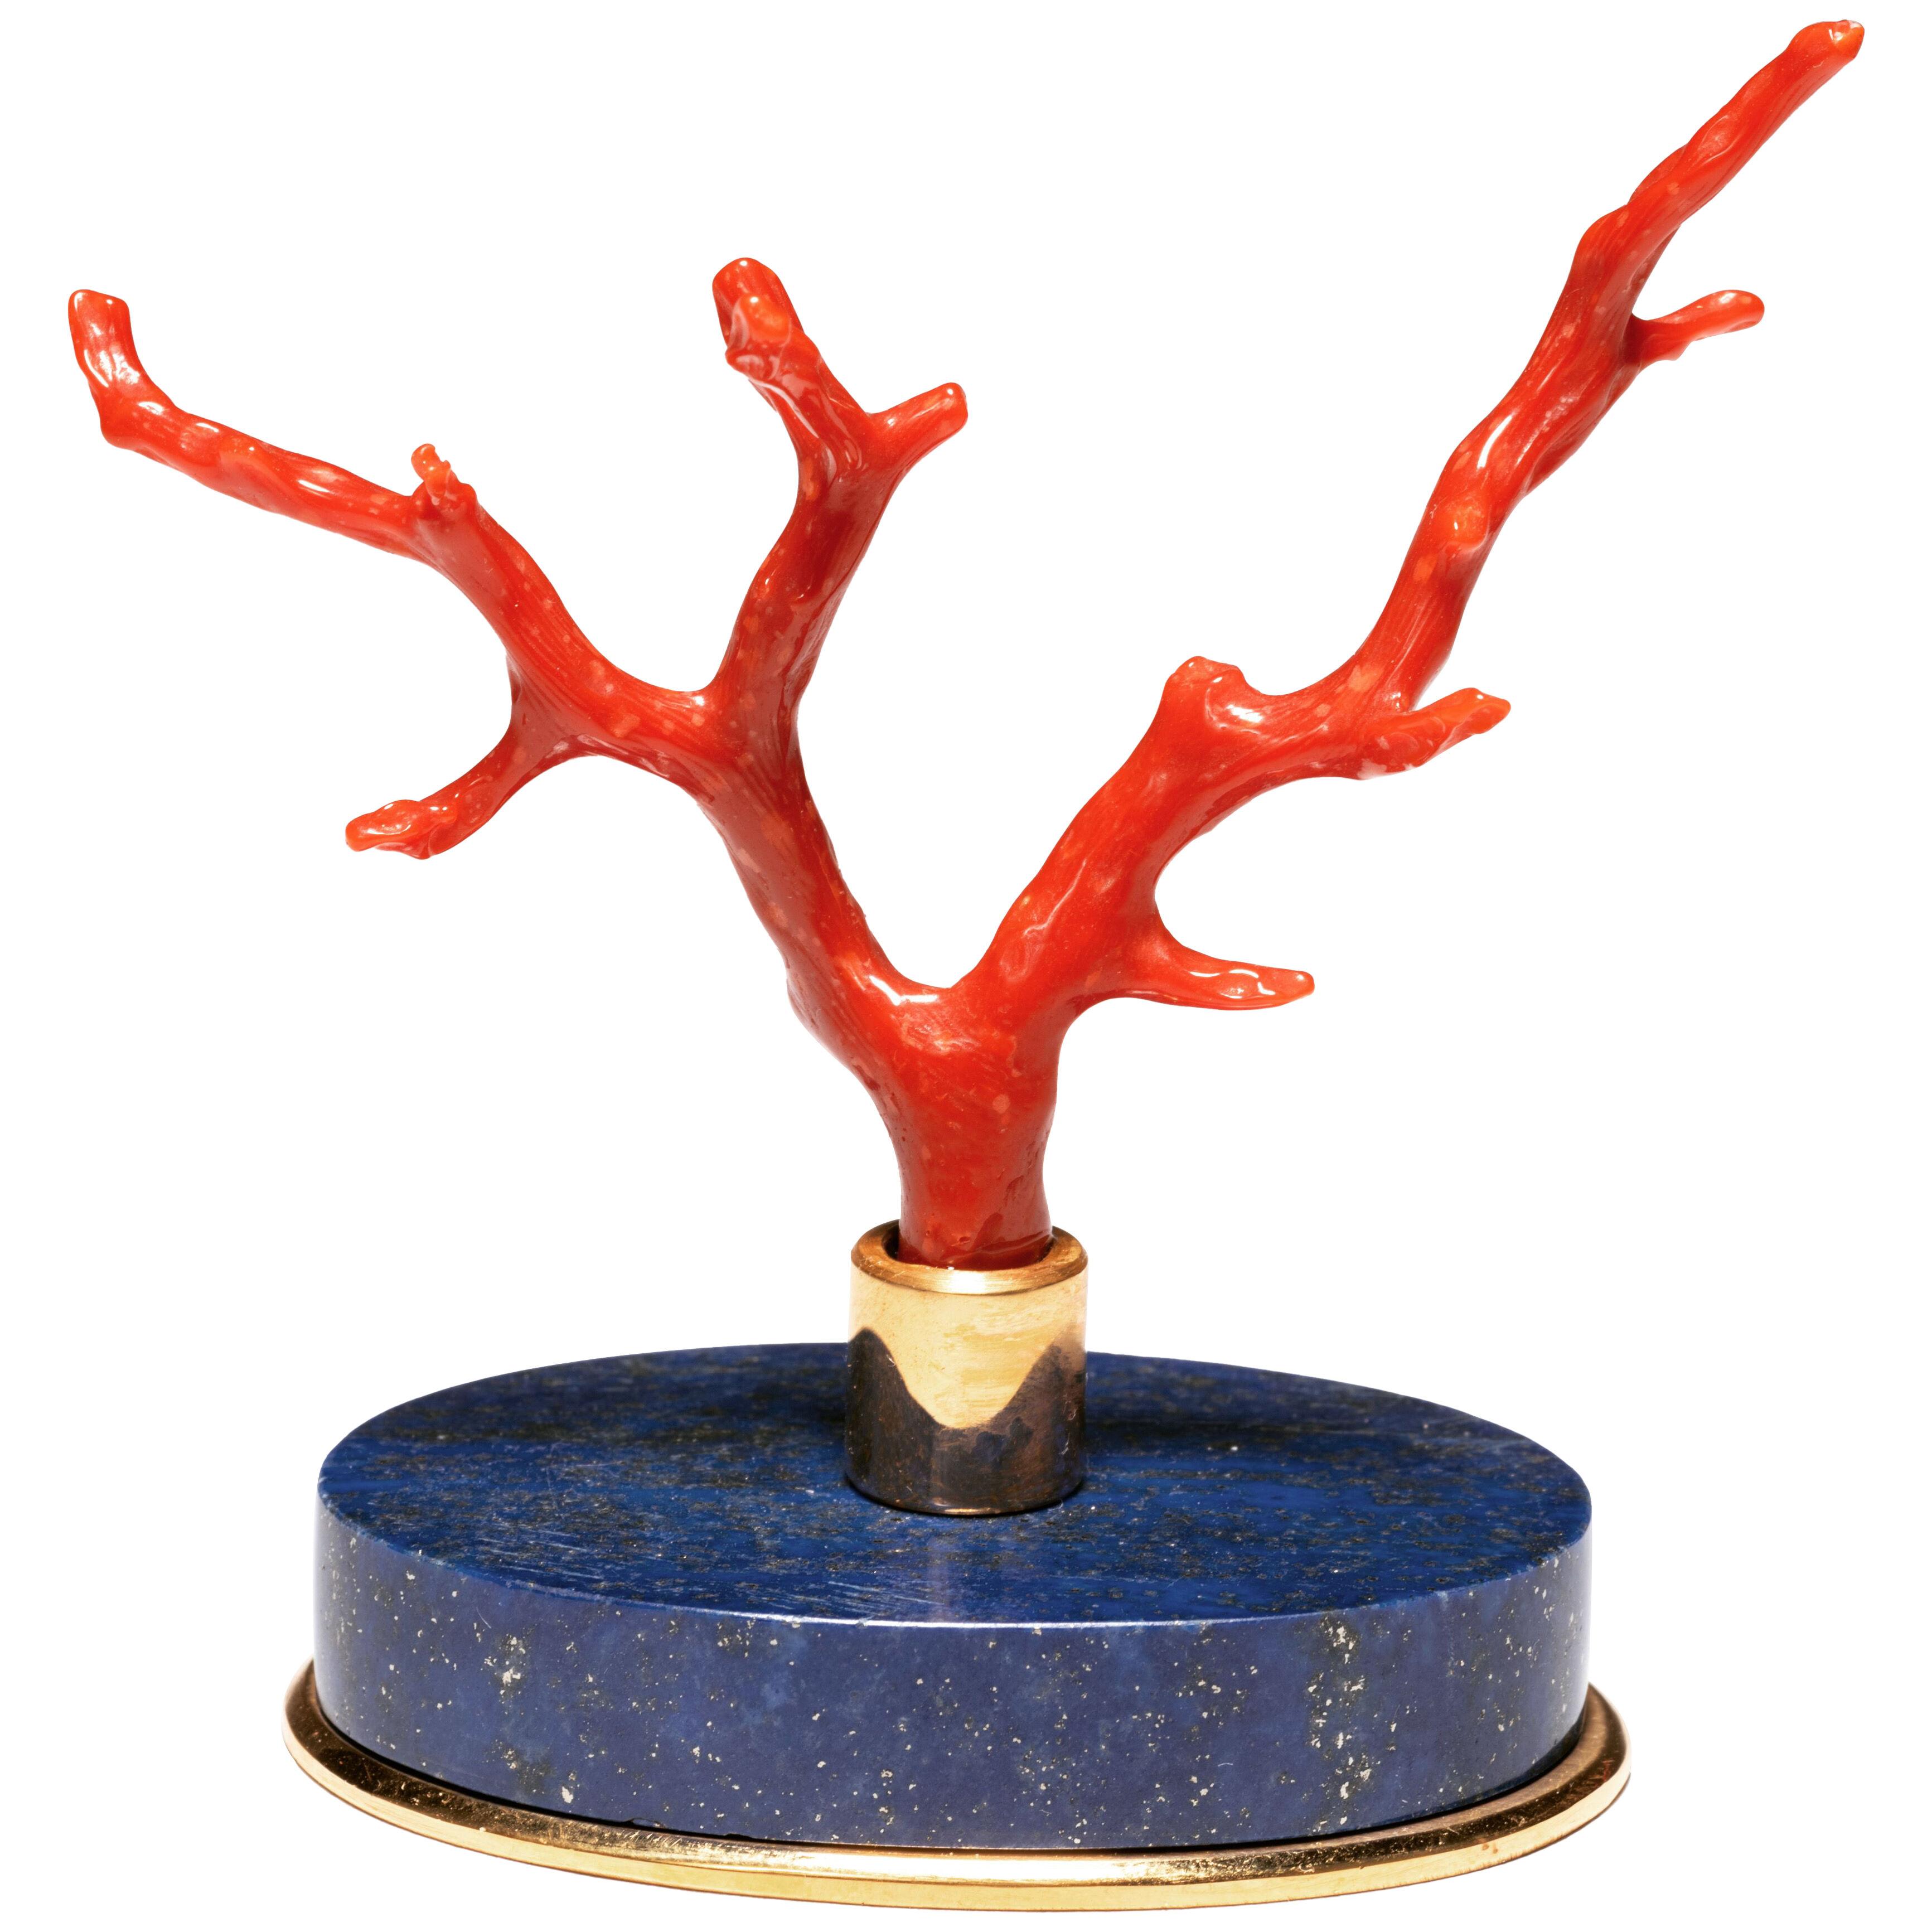 Lapis Lazuli Base and Mediterranean Coral Branch by Alexandre Vossion